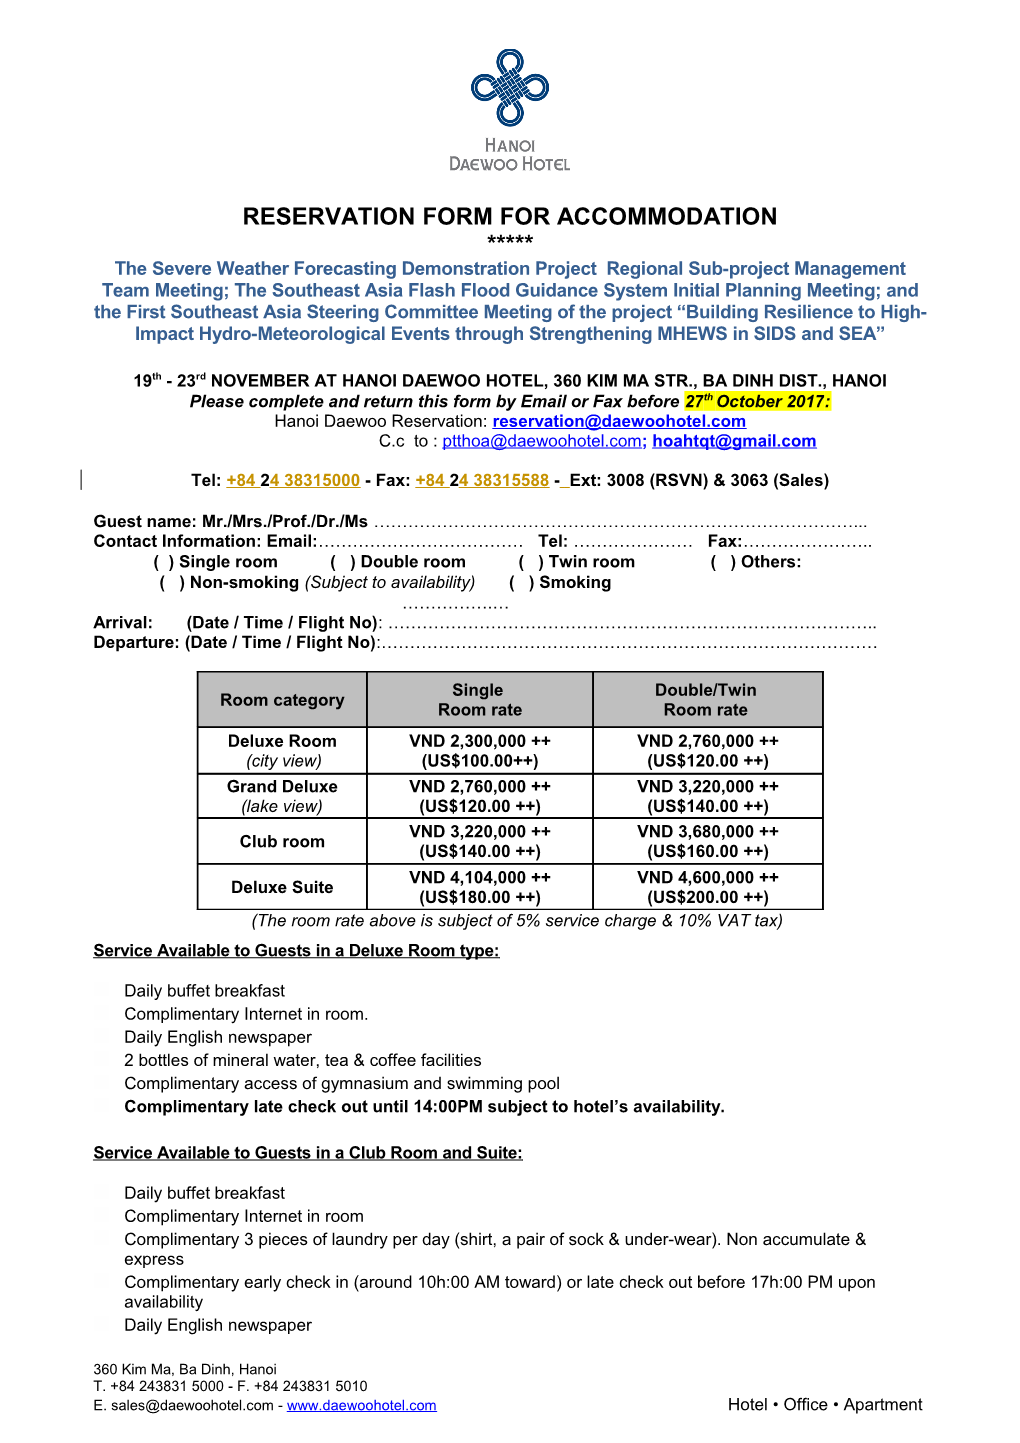 Reservation Form for Accommodation